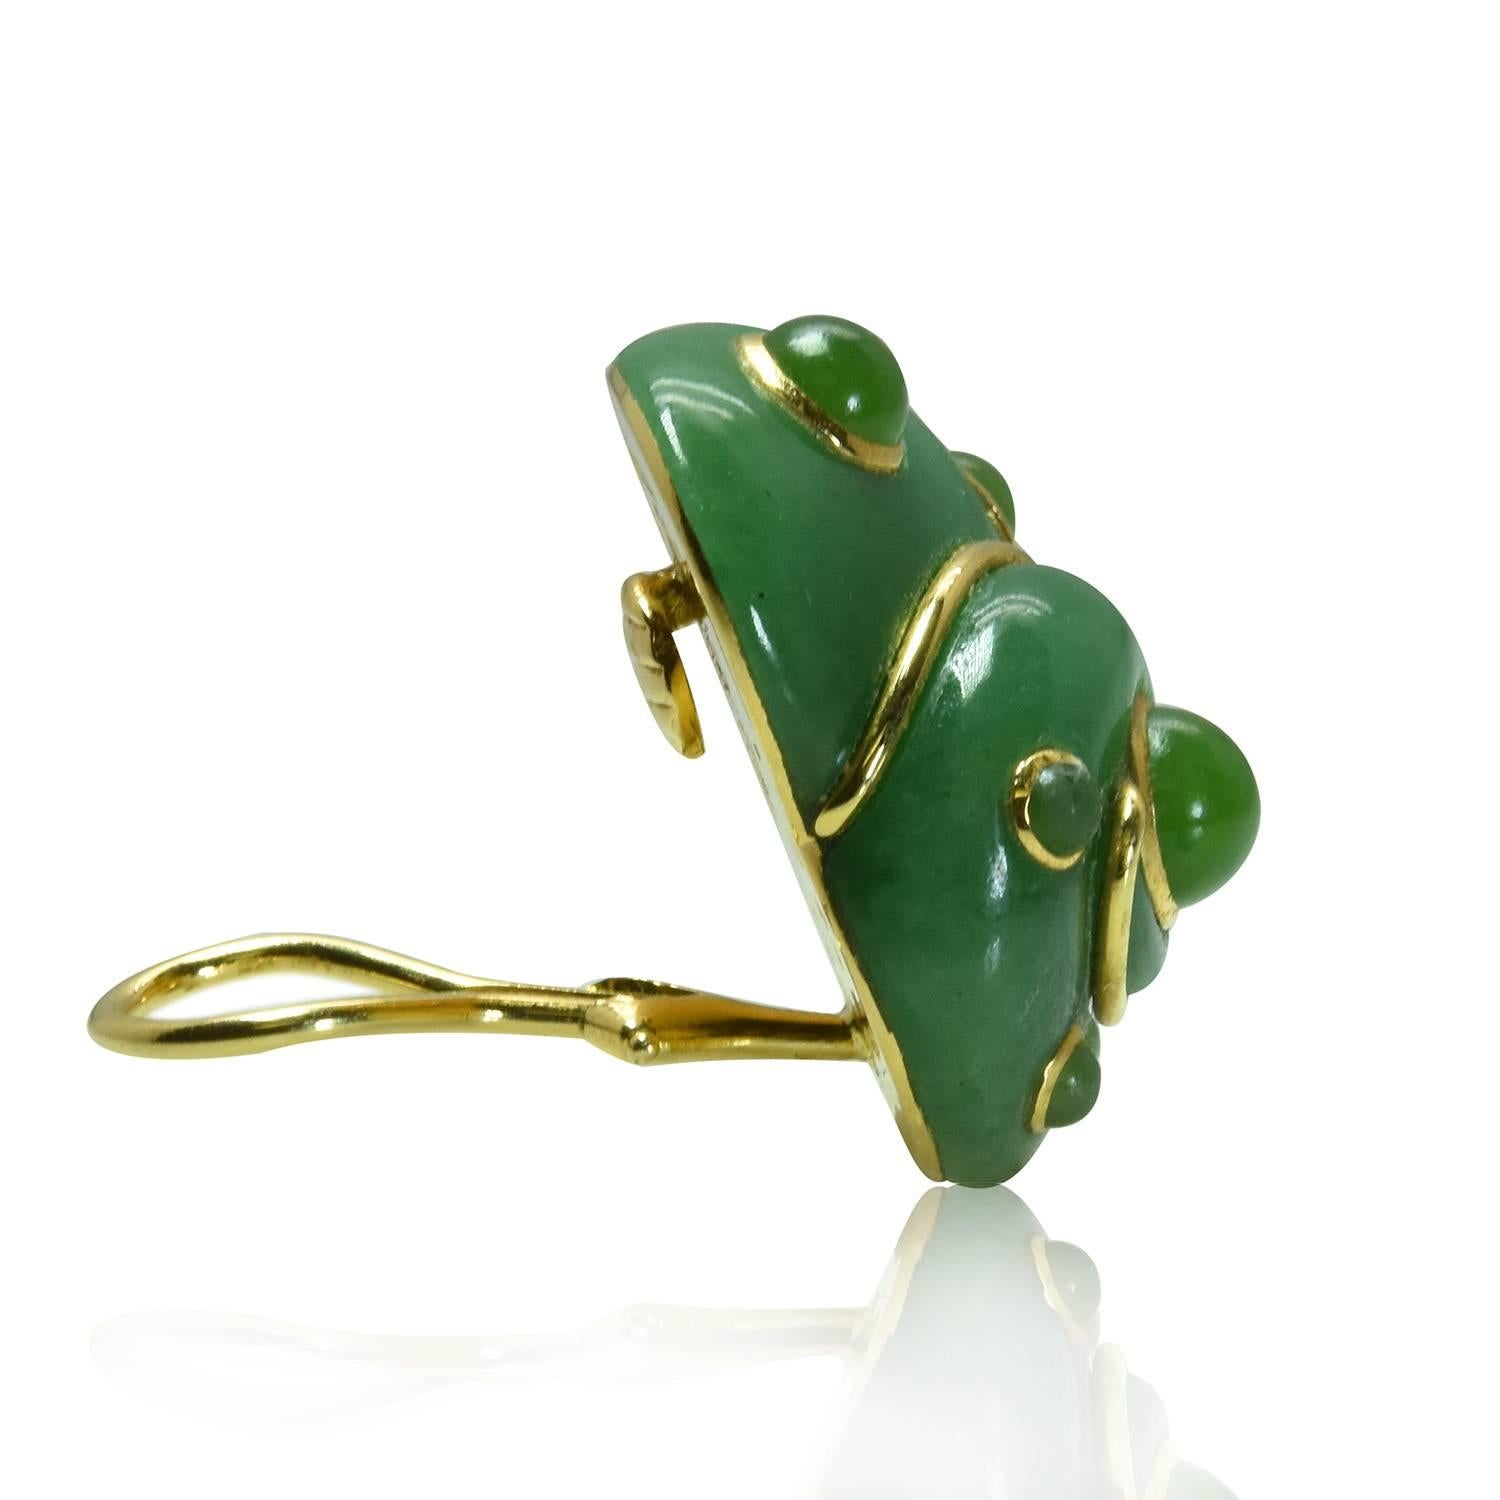 he iconic shell ear clips by renown design house, Verdura. These earrings feature Aventurine Quartz set with Nephrite cabochons in 18k Yellow Gold. The ear clips are signed by Verdura, numbered and stamped '750'.